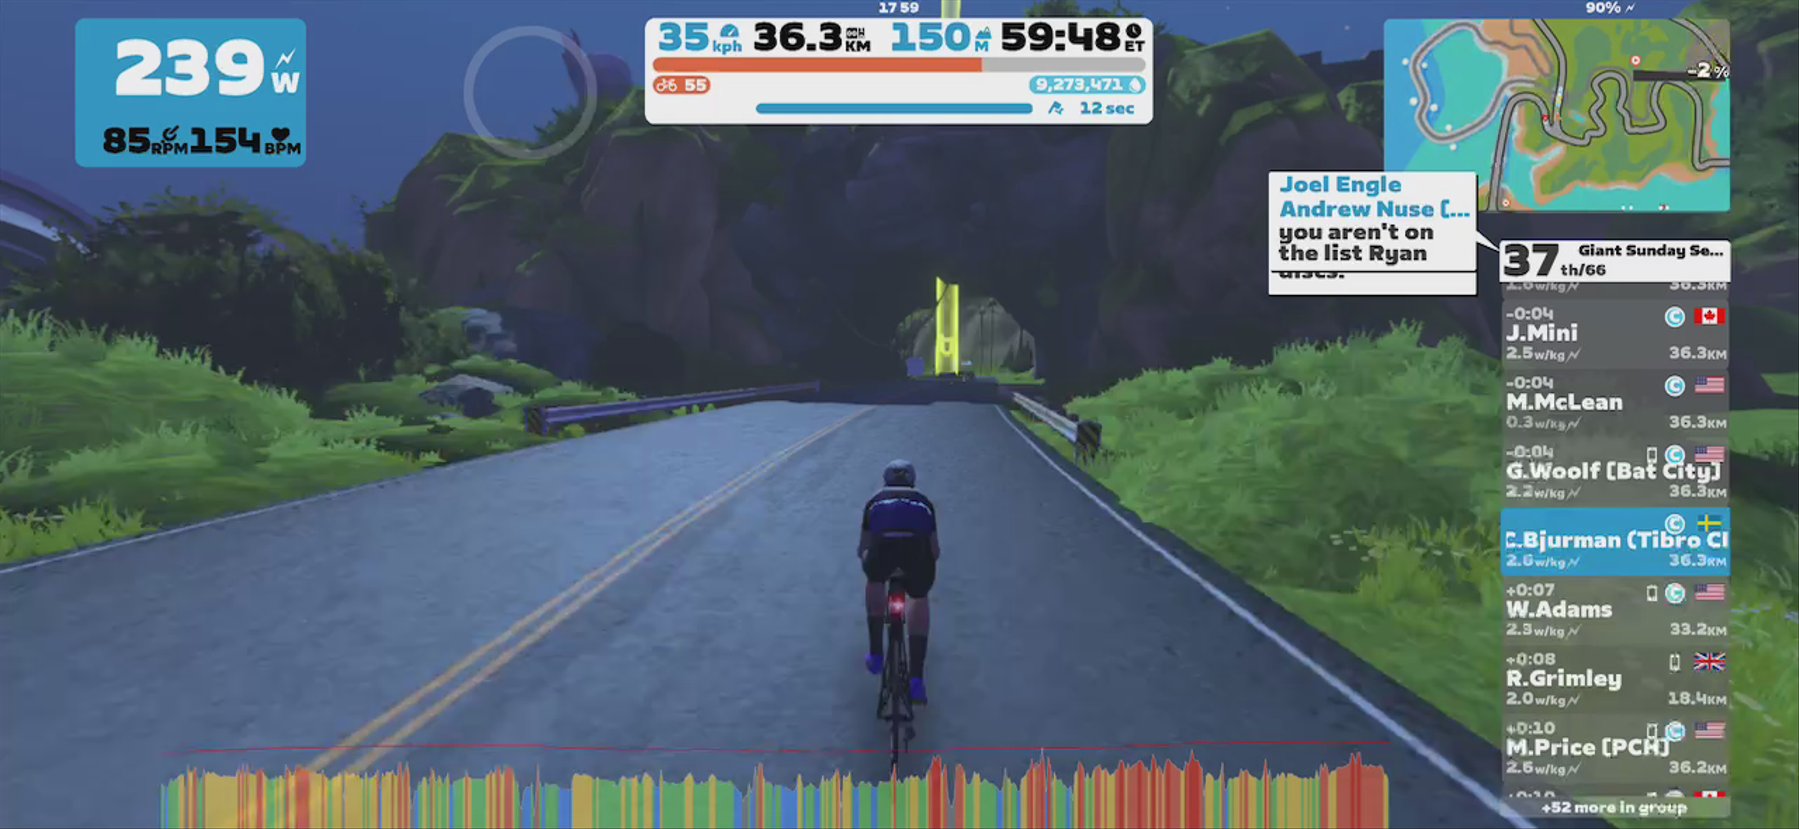 Zwift - Group Ride: Giant Sunday Session Ride Series (C) on Volcano Flat in Watopia